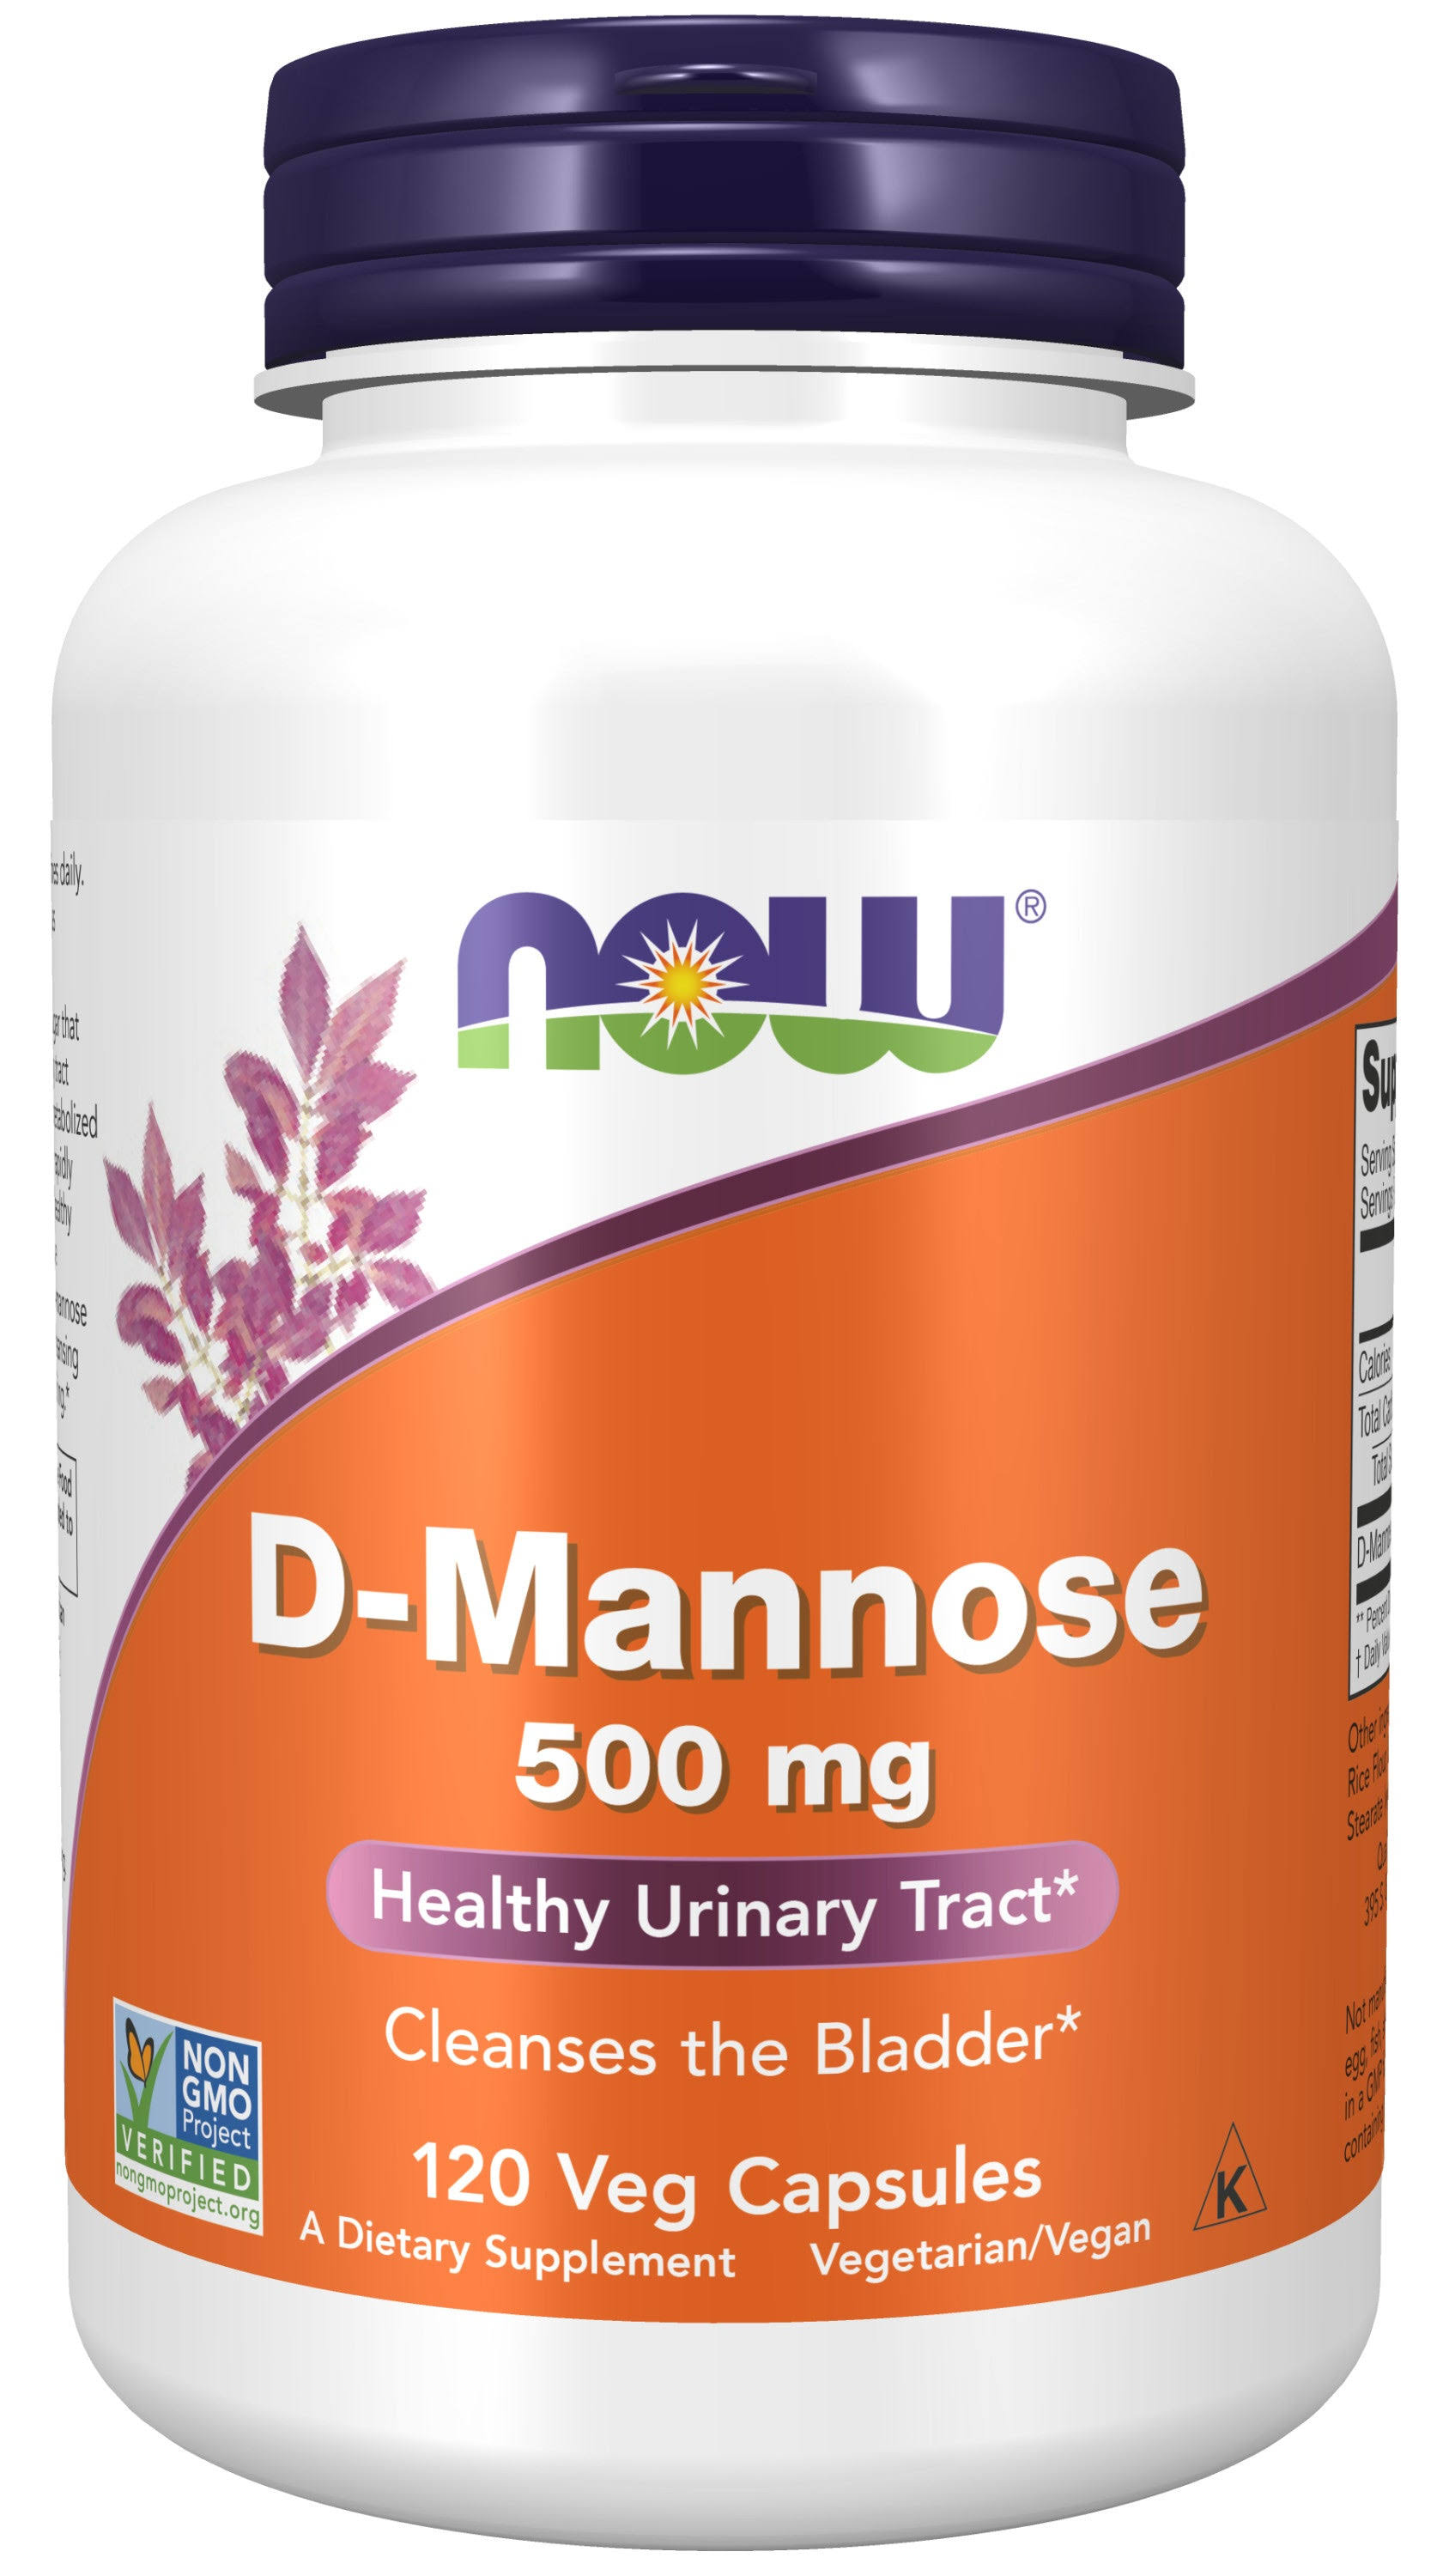 Now D-Mannose Healthy Urinary Tract